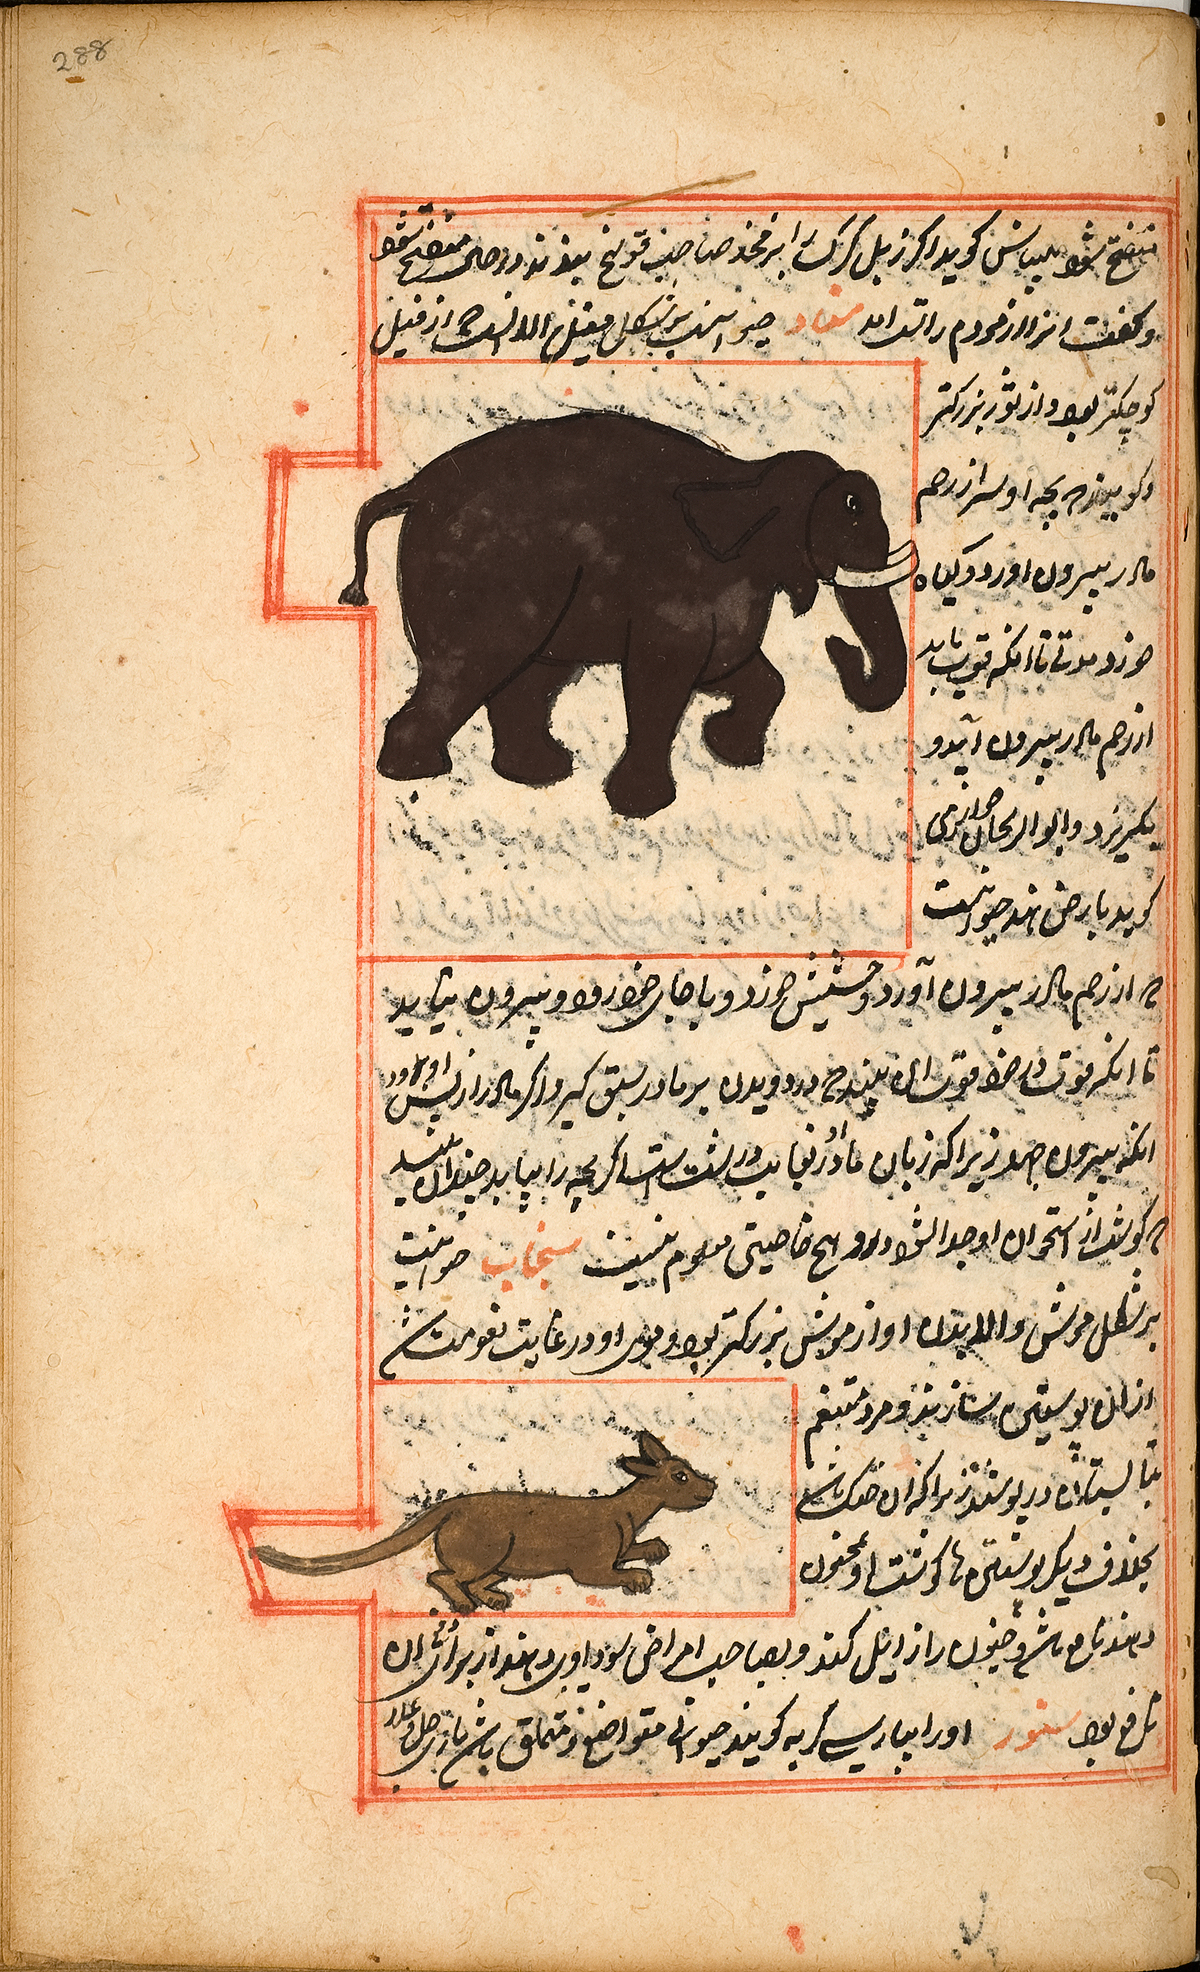 The top image is a large brown elephant with large white tusks and a small mammal native to the Middle East, surrounded by Persian text and a red double ruled border.